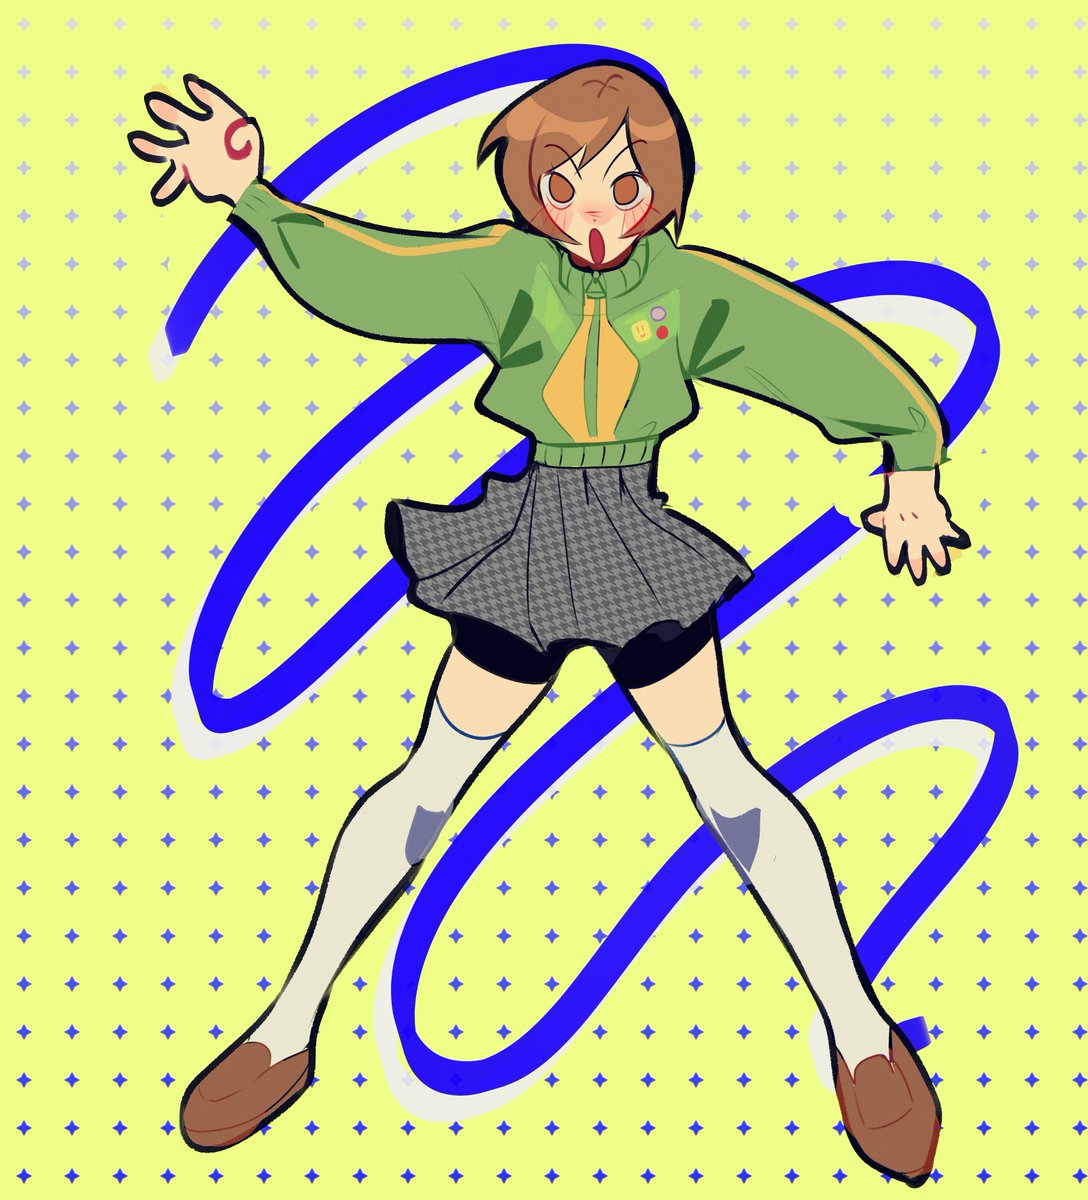 Chie scribble 💚 #Persona4 #Chie #fanart